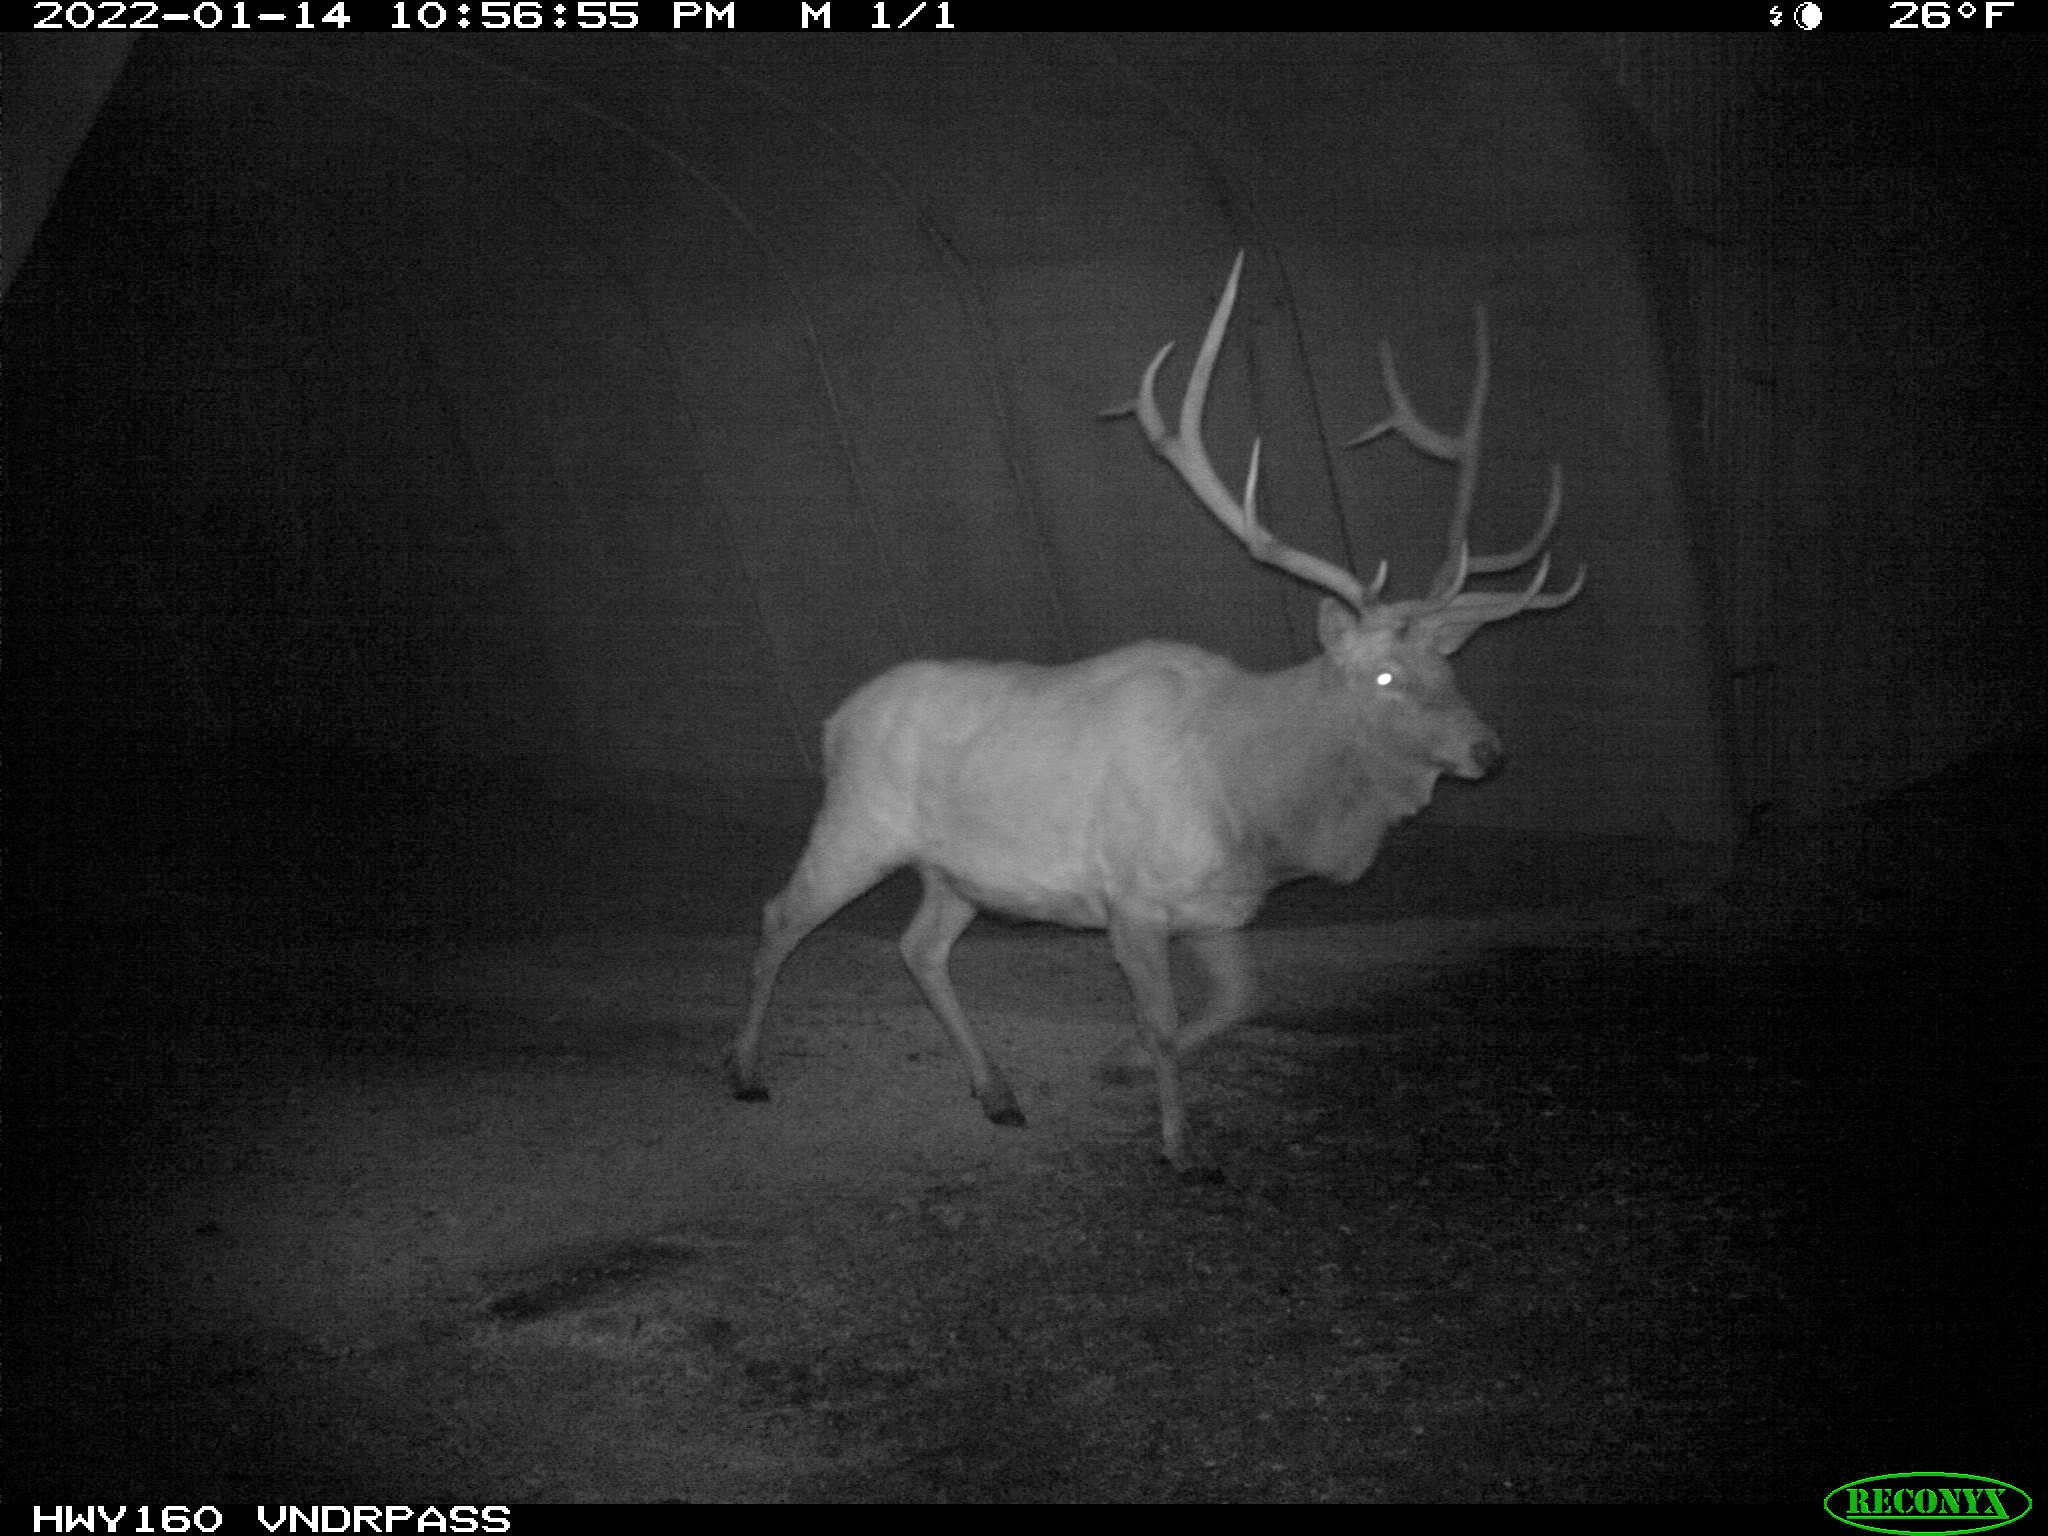 Wildlife underpass is already seeing animal presence captured by CDOT's critter cam. detail image